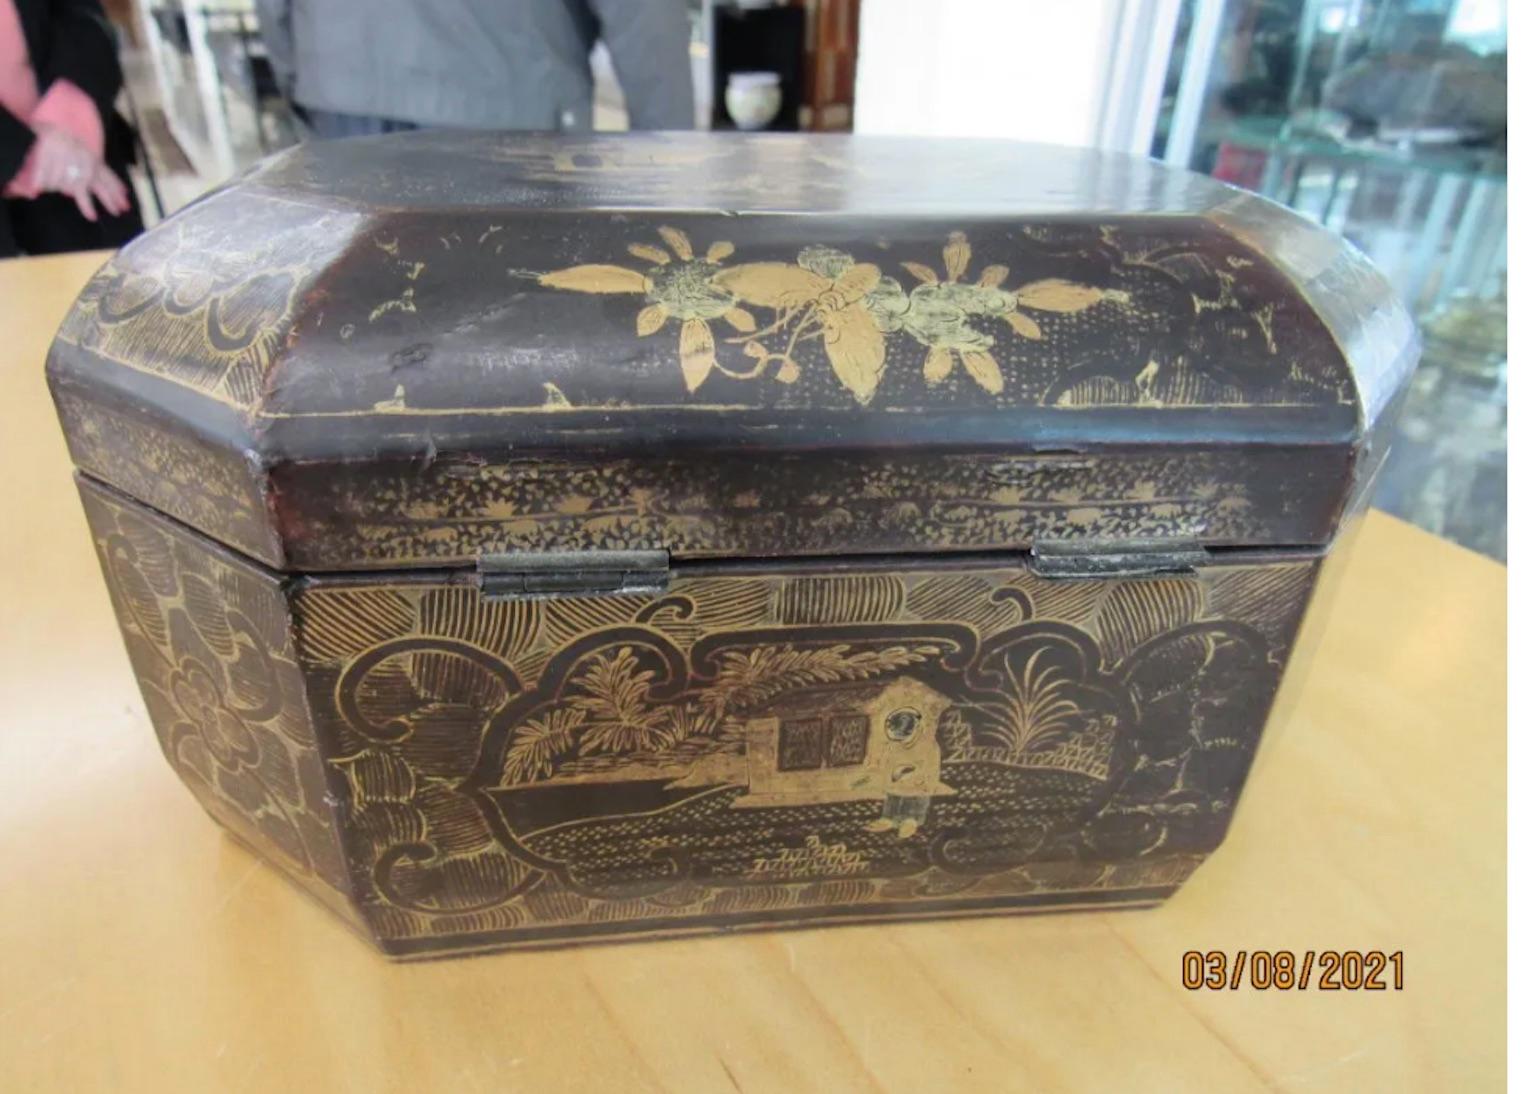 Regency Two Chinese Export Lacquer Tea Caddy for the English Trade, Priced Per Tea Caddy For Sale